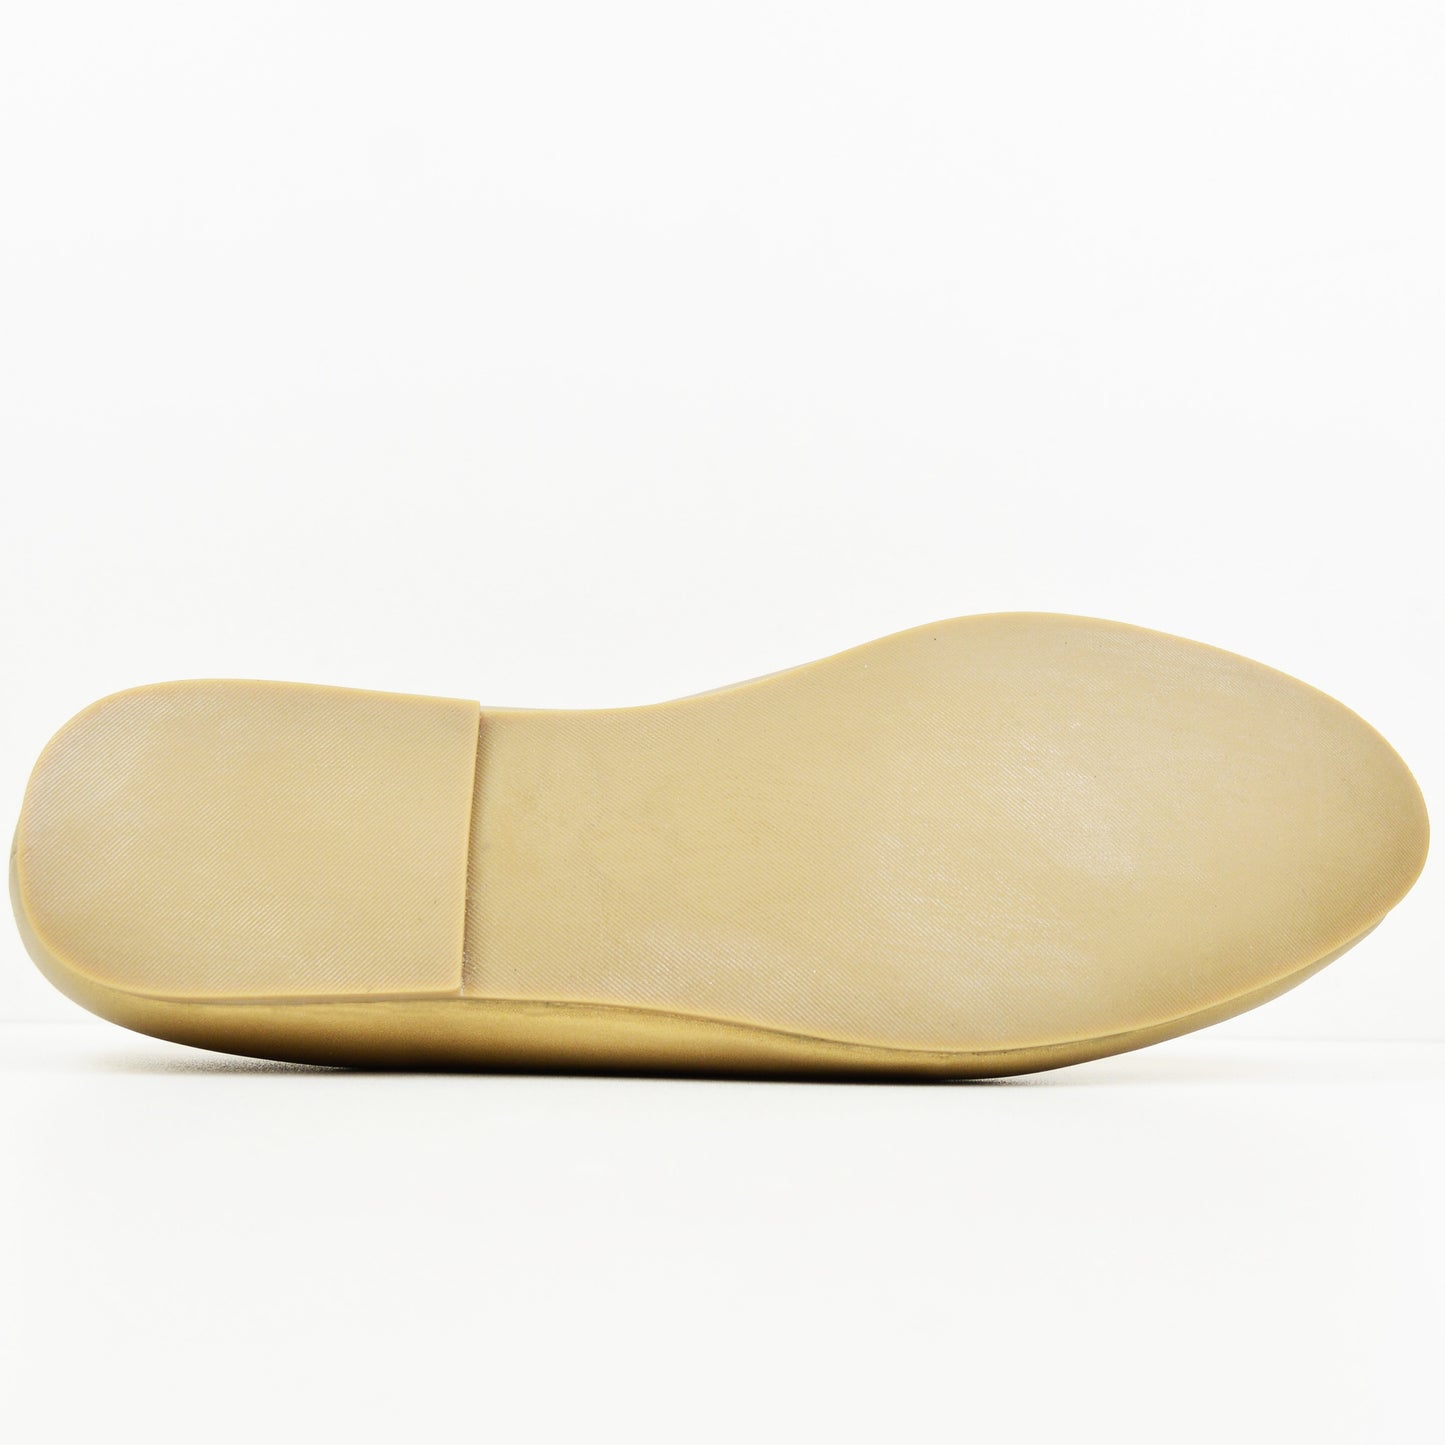 Rubber sole of gold leather Mojri